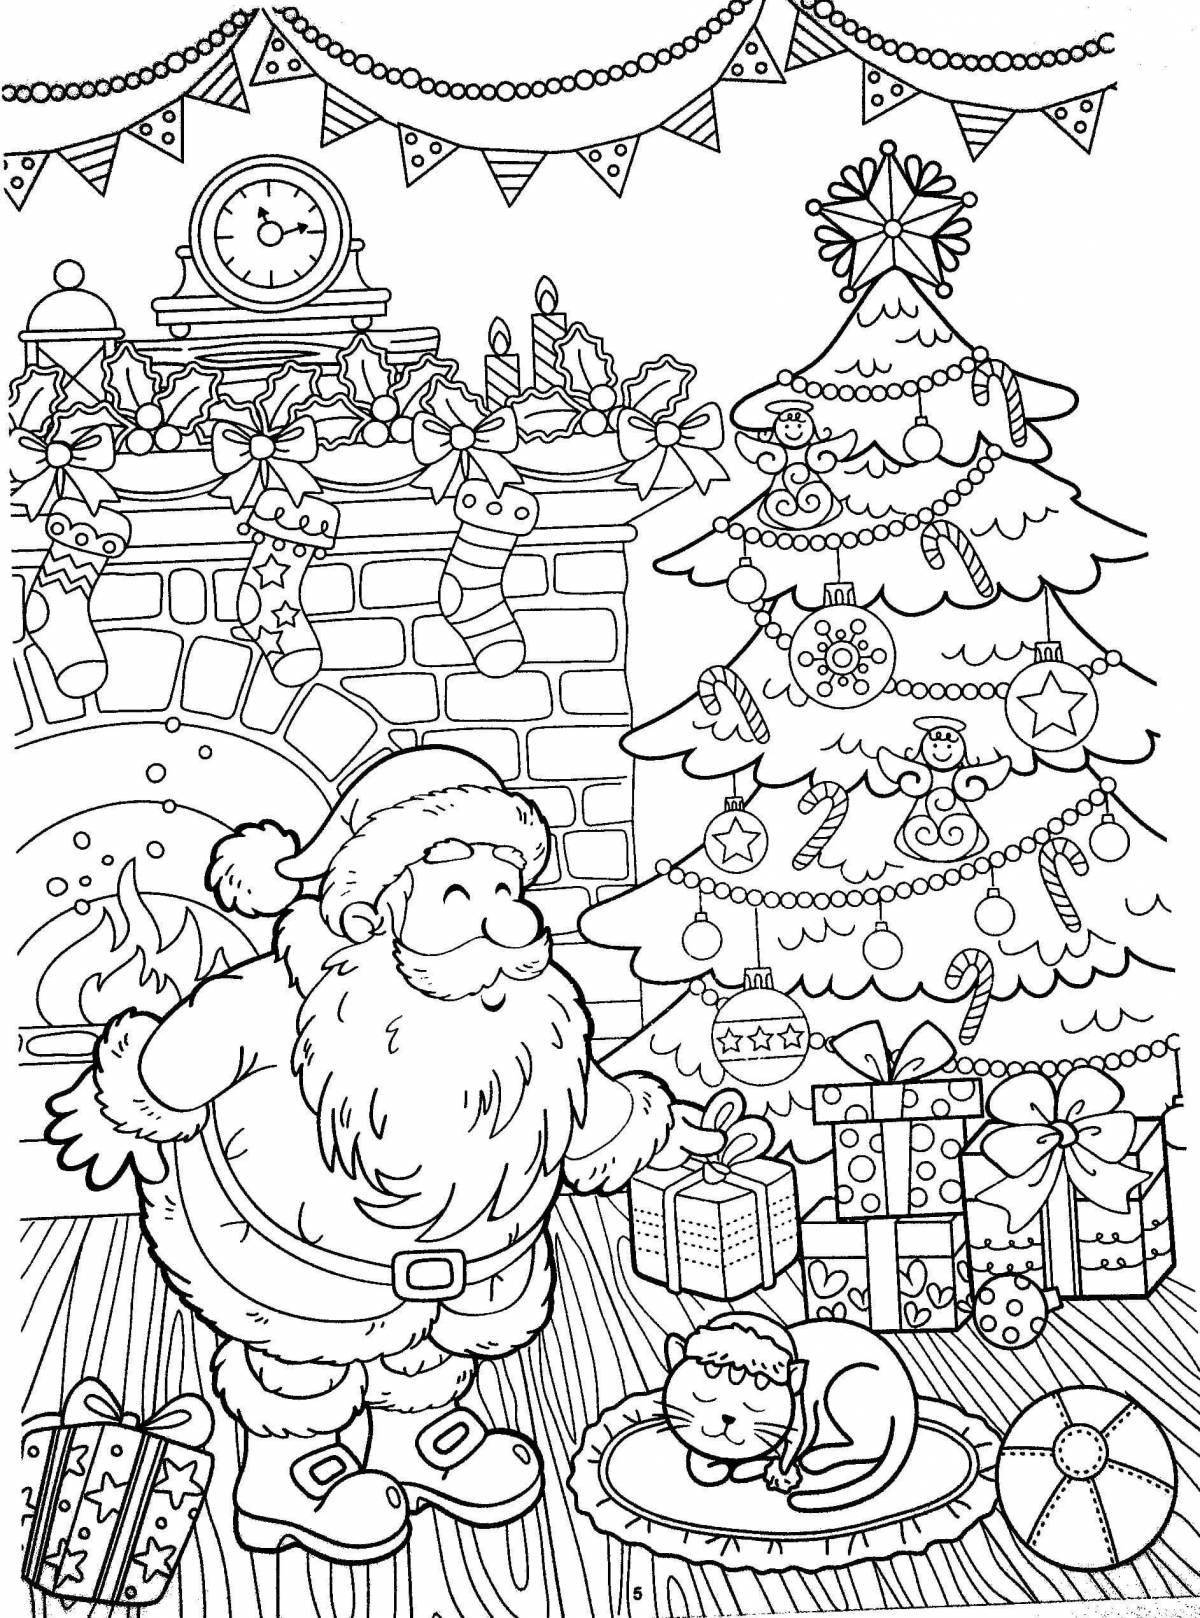 Rainbow Christmas coloring book for kids